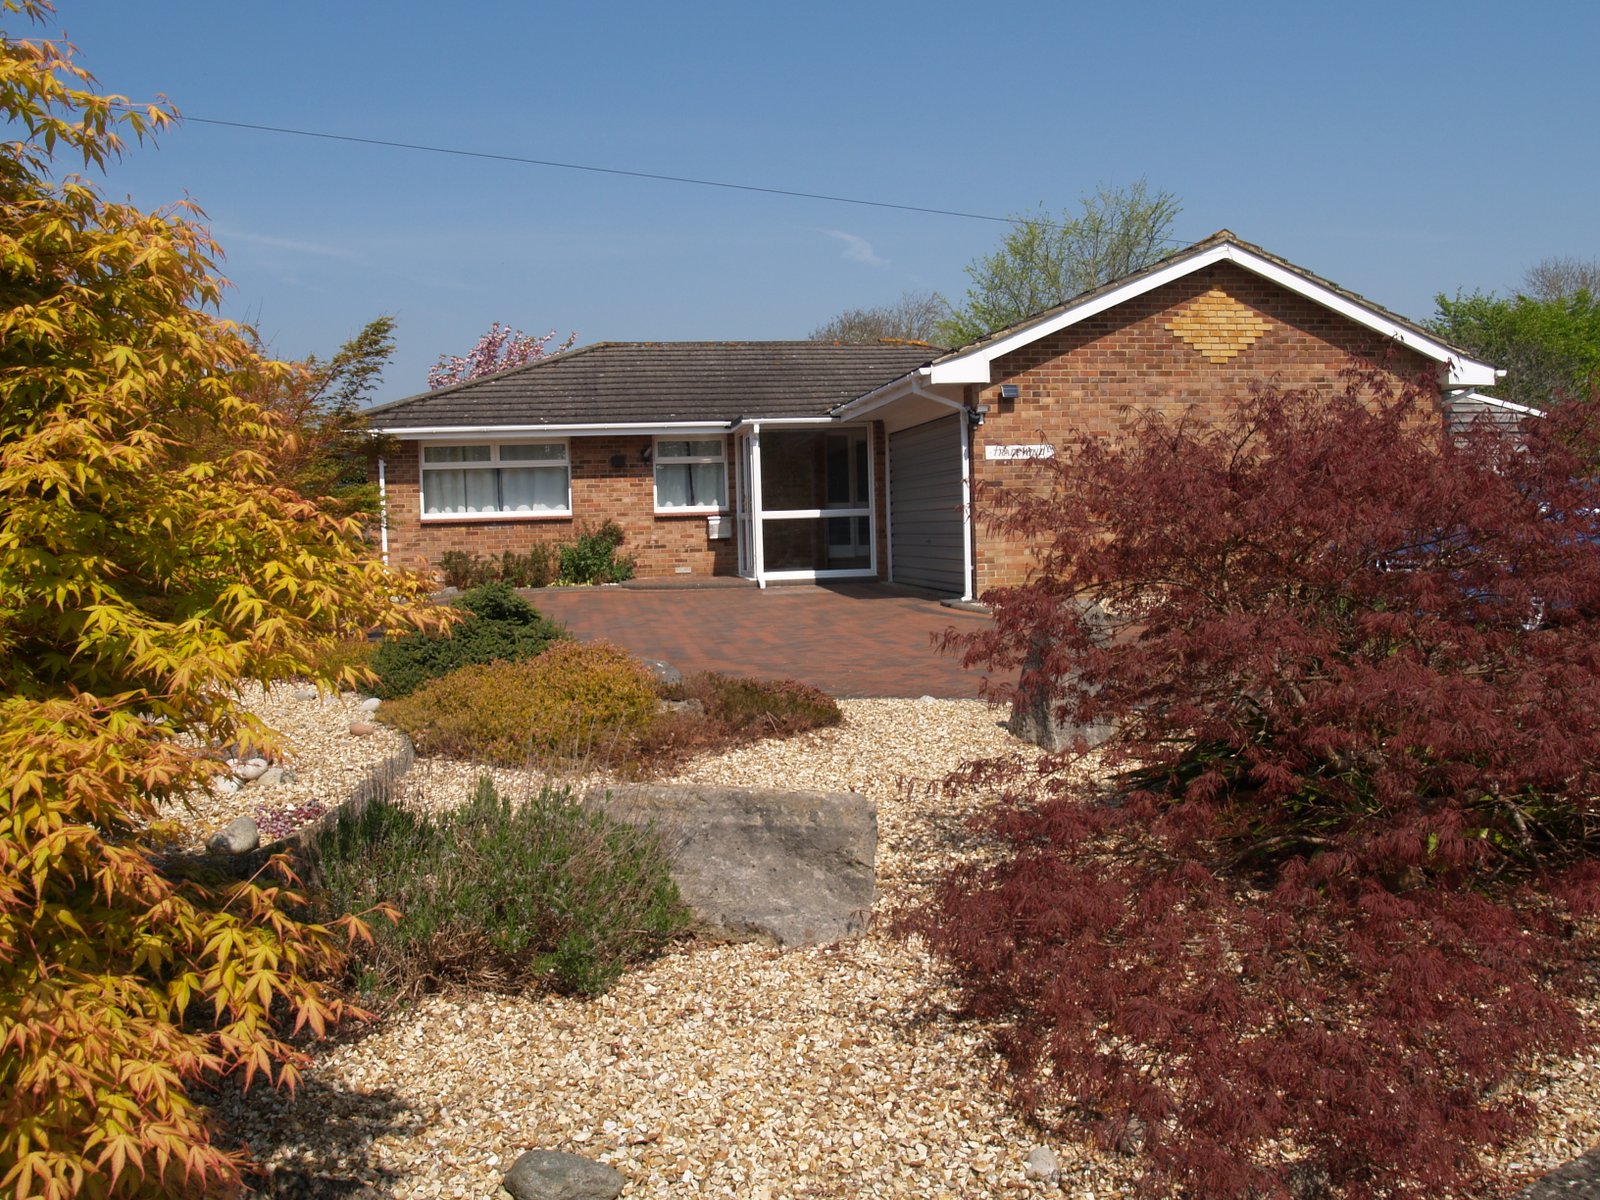 Tradewind, bungalow on the Isle of Wight with a blue sky, driveway and gravel garden